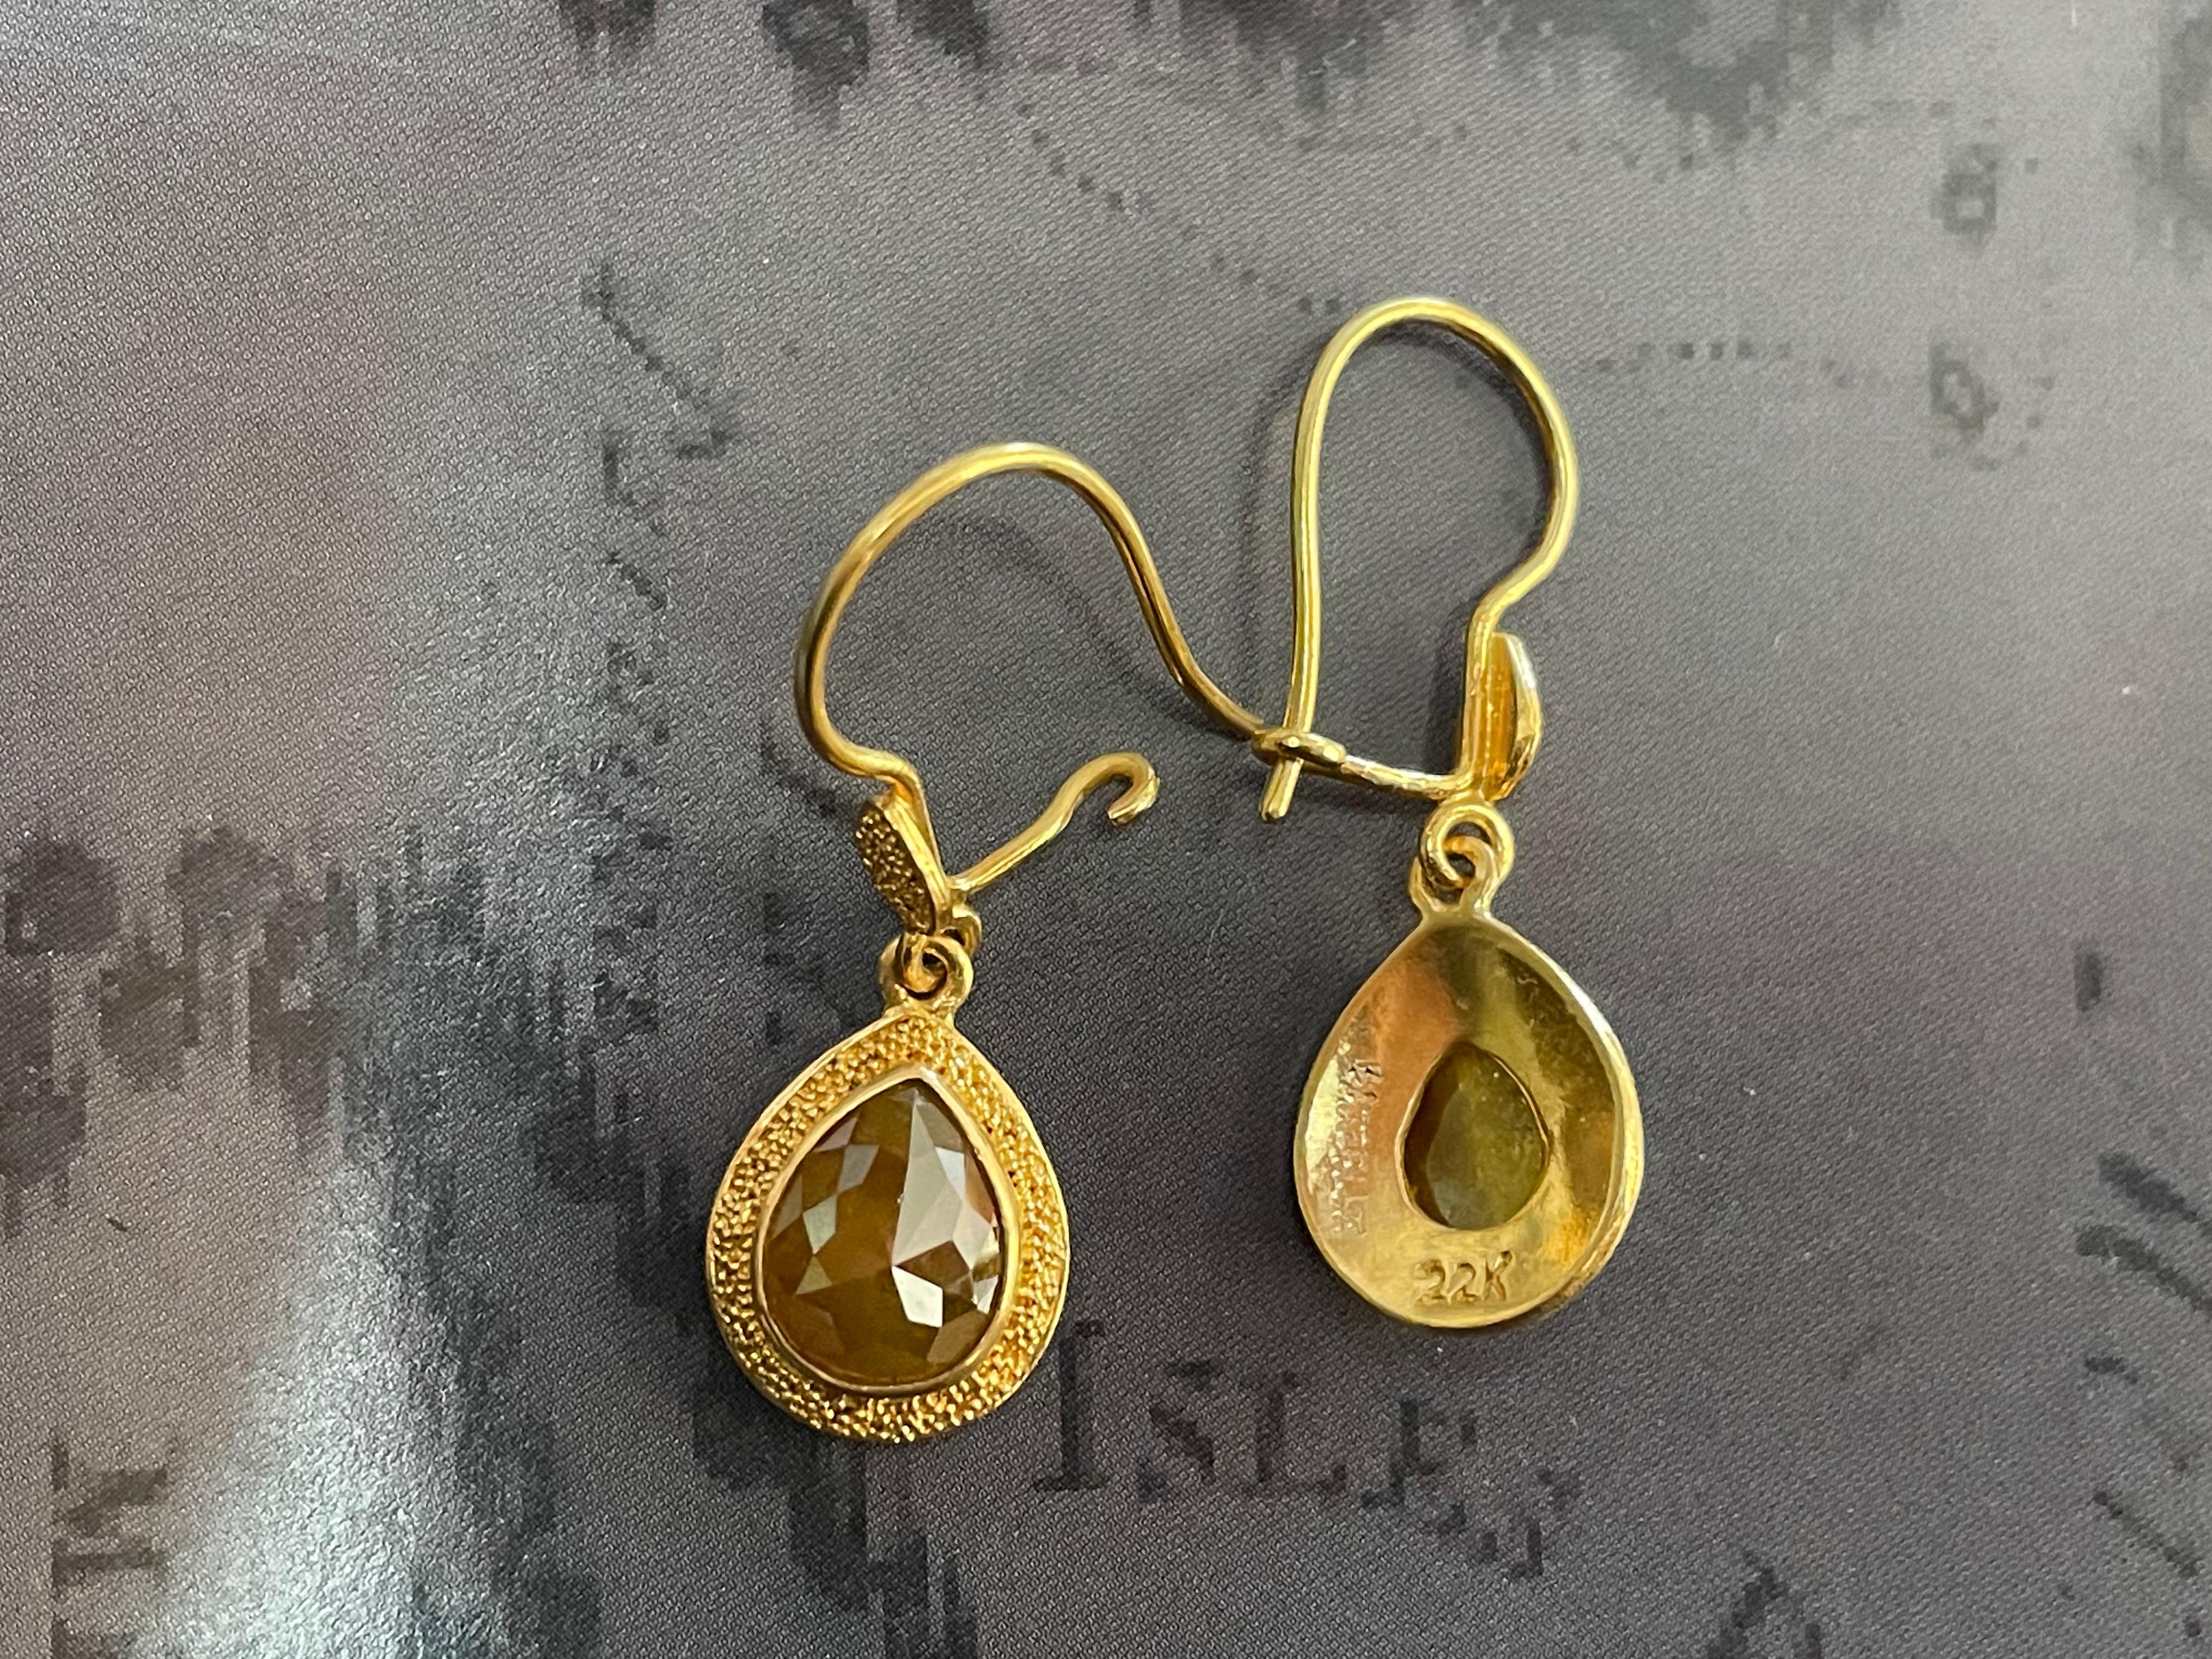 Steven Battelle Rose Cut Colored Diamond Drop Earrings 22K Gold In New Condition For Sale In Soquel, CA